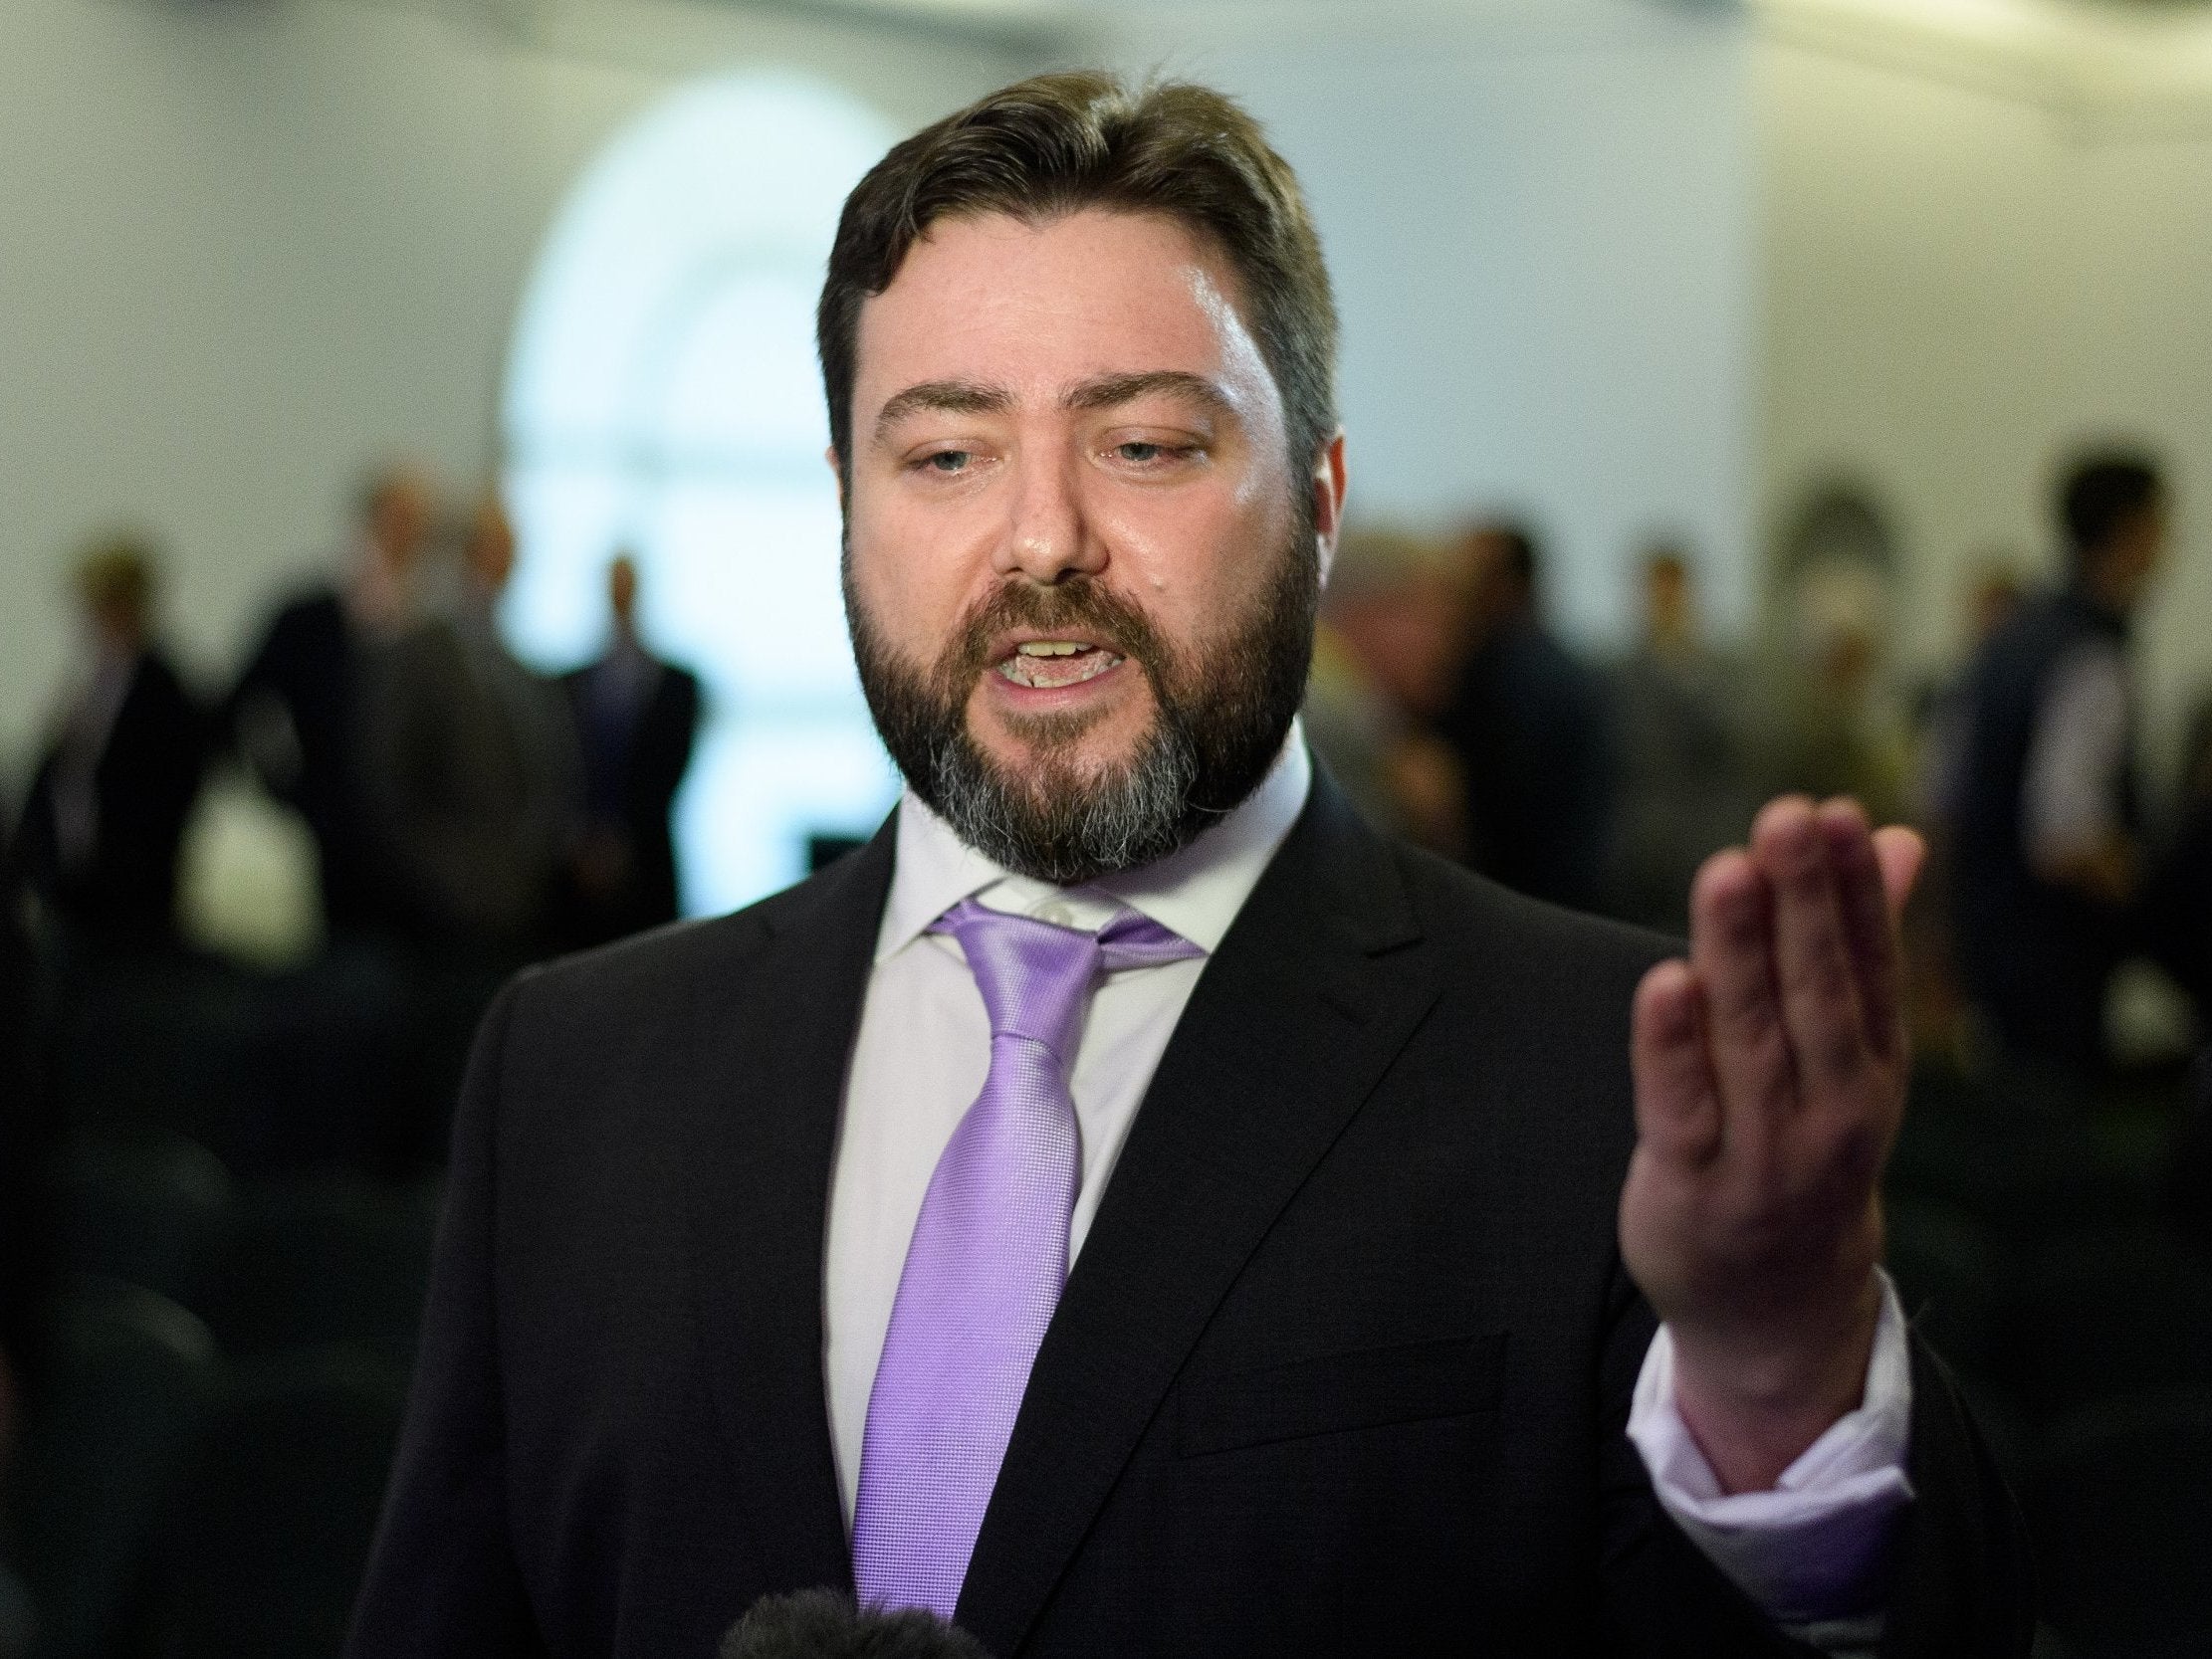 Carl Benjamin, who insists his rape comments were 'a joke', has been refused permission to speak at the cathedral